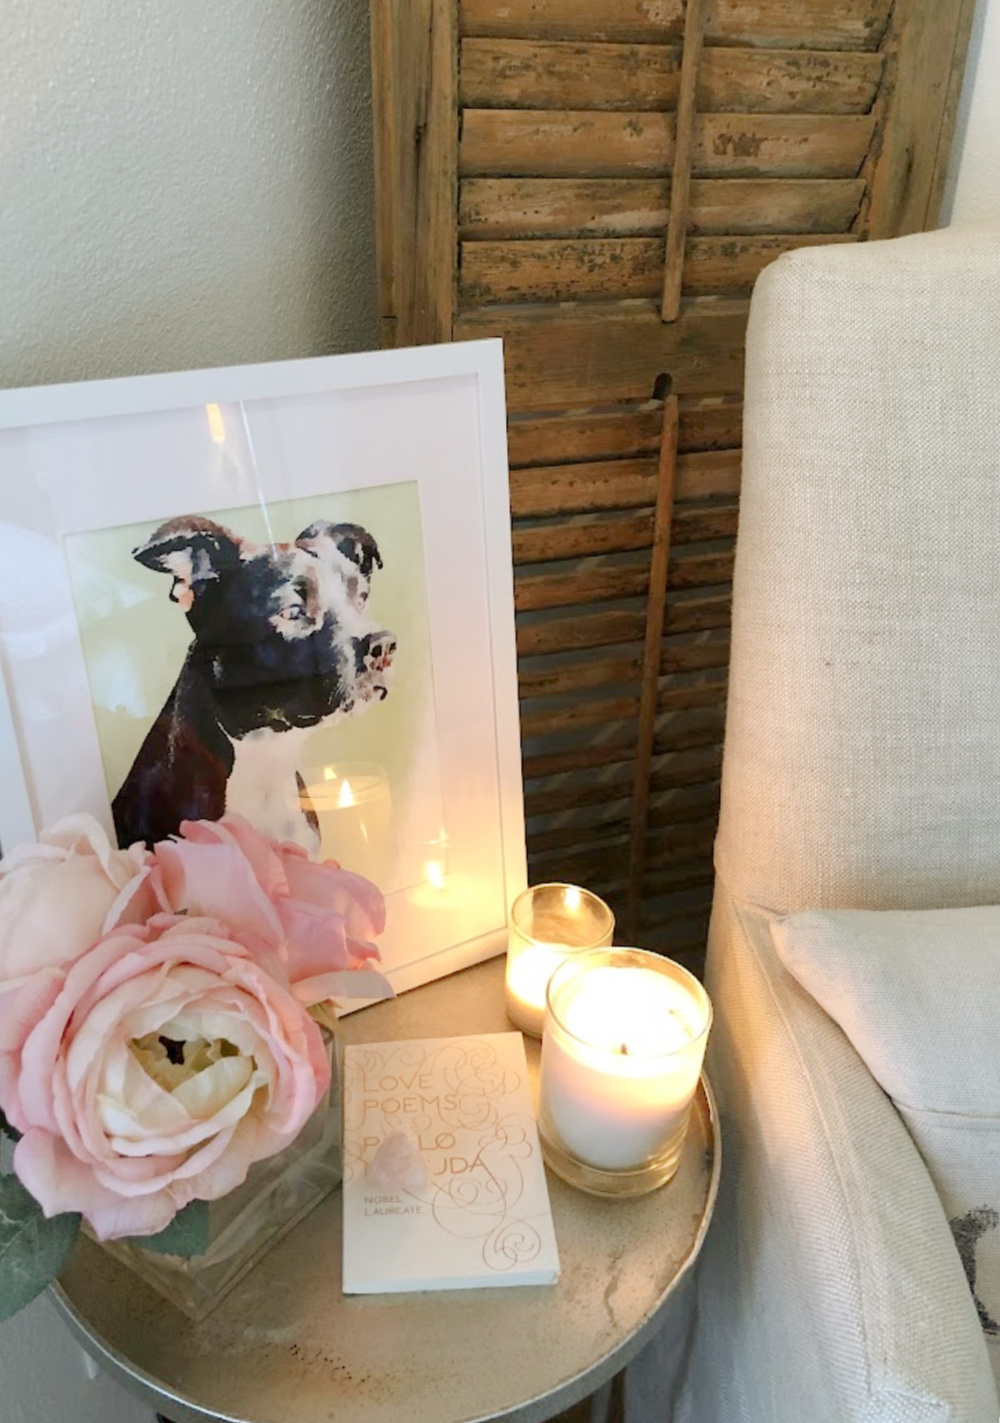 Pit bull dog watercolor custom pet portrait from minted in white frame in a cozy corner of our bedroom - Hello Lovely. #dogwatercolor #petpainting #pitbullpainting